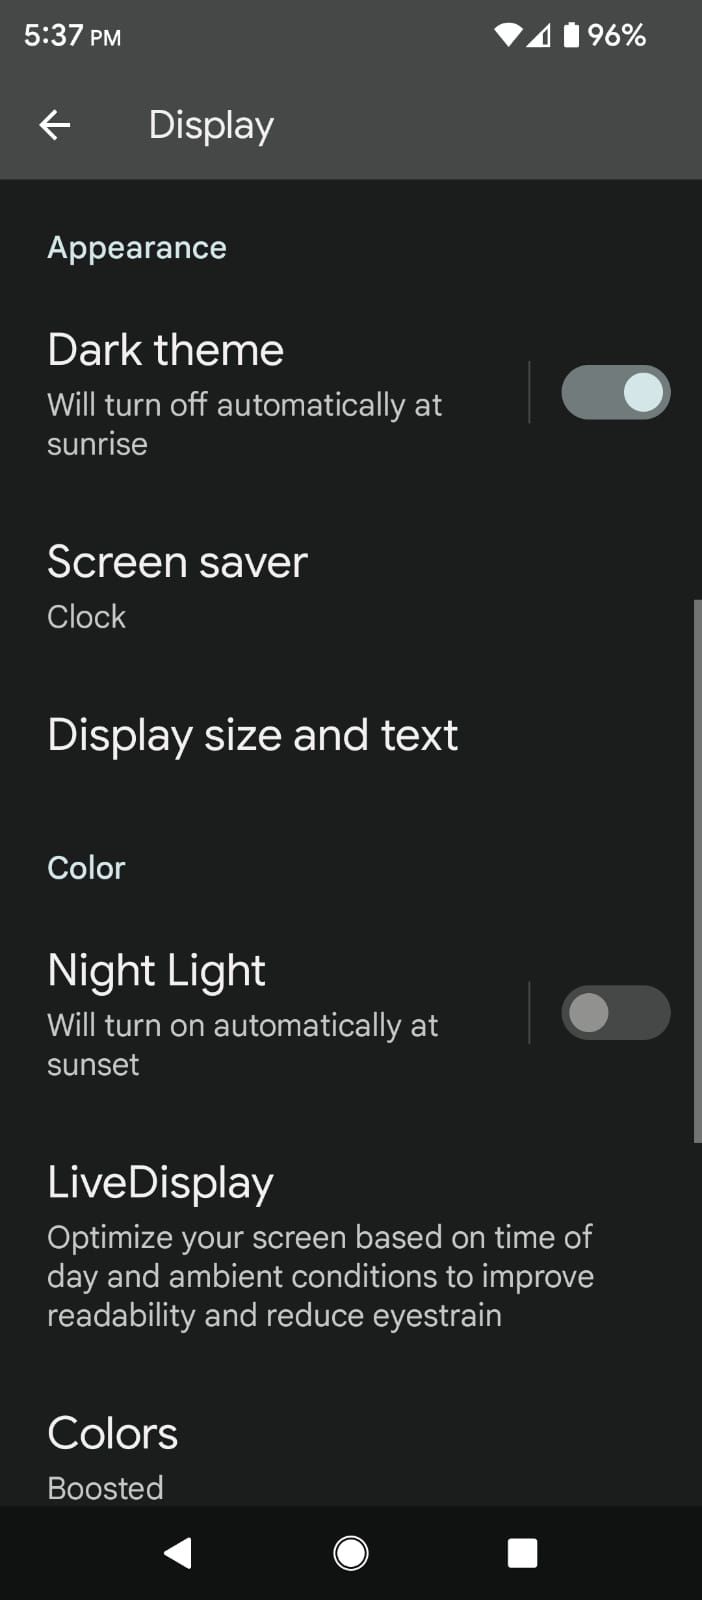 Turning on the Dark Theme or Mode in the Android Display Settings